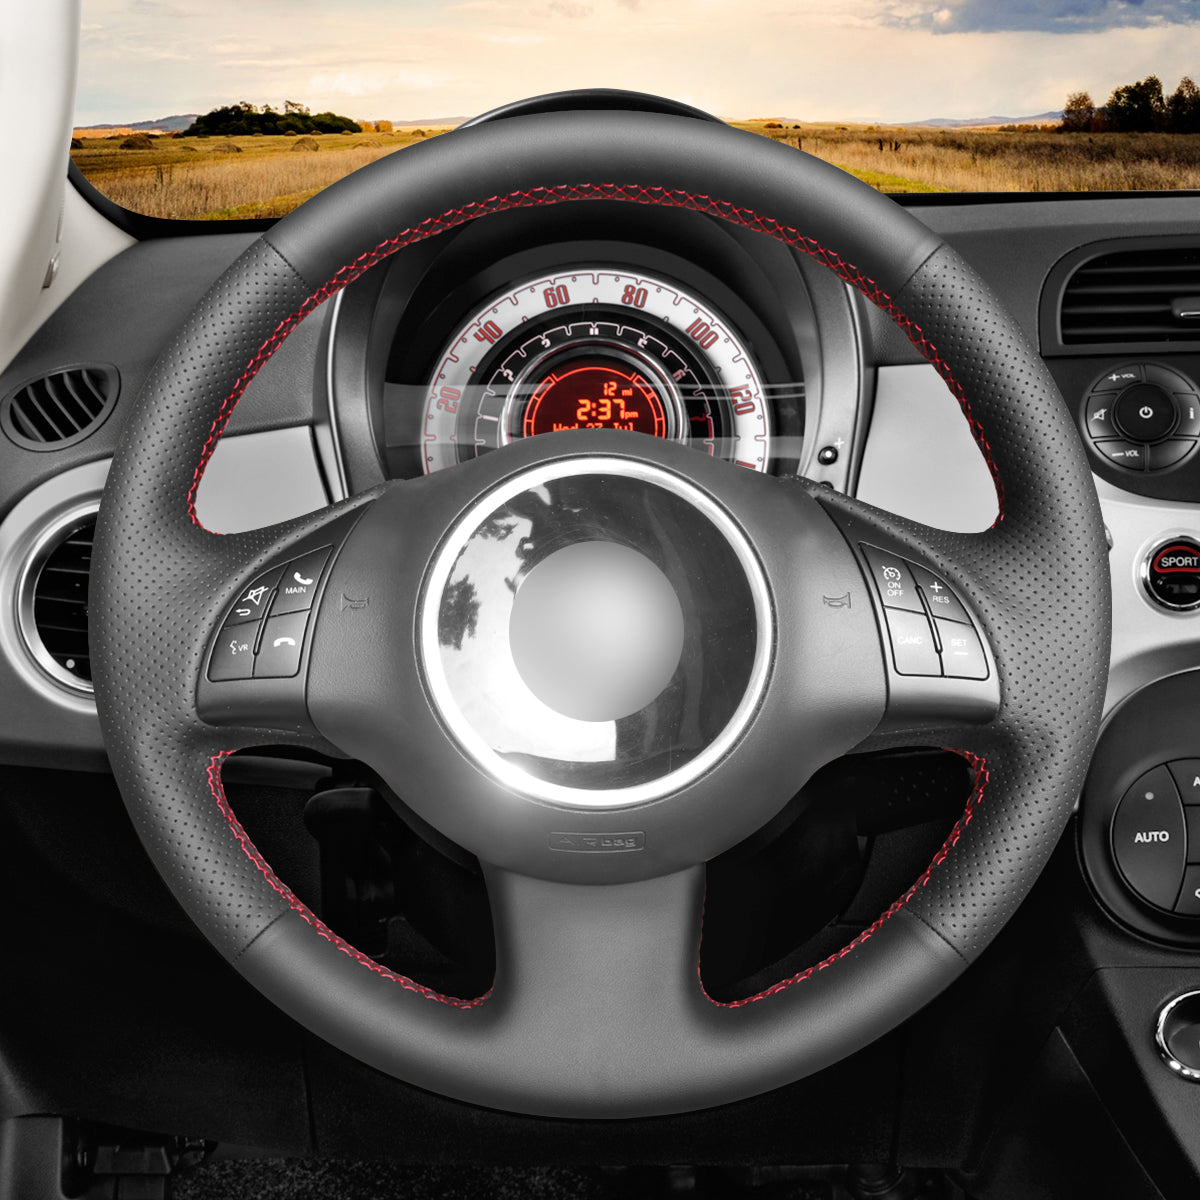 MEWANT Car Steering Wheel Cover for Fiat 500 2007-2015 / Fiat 500e 2014-2018 / Fiat 500C 2014-2017